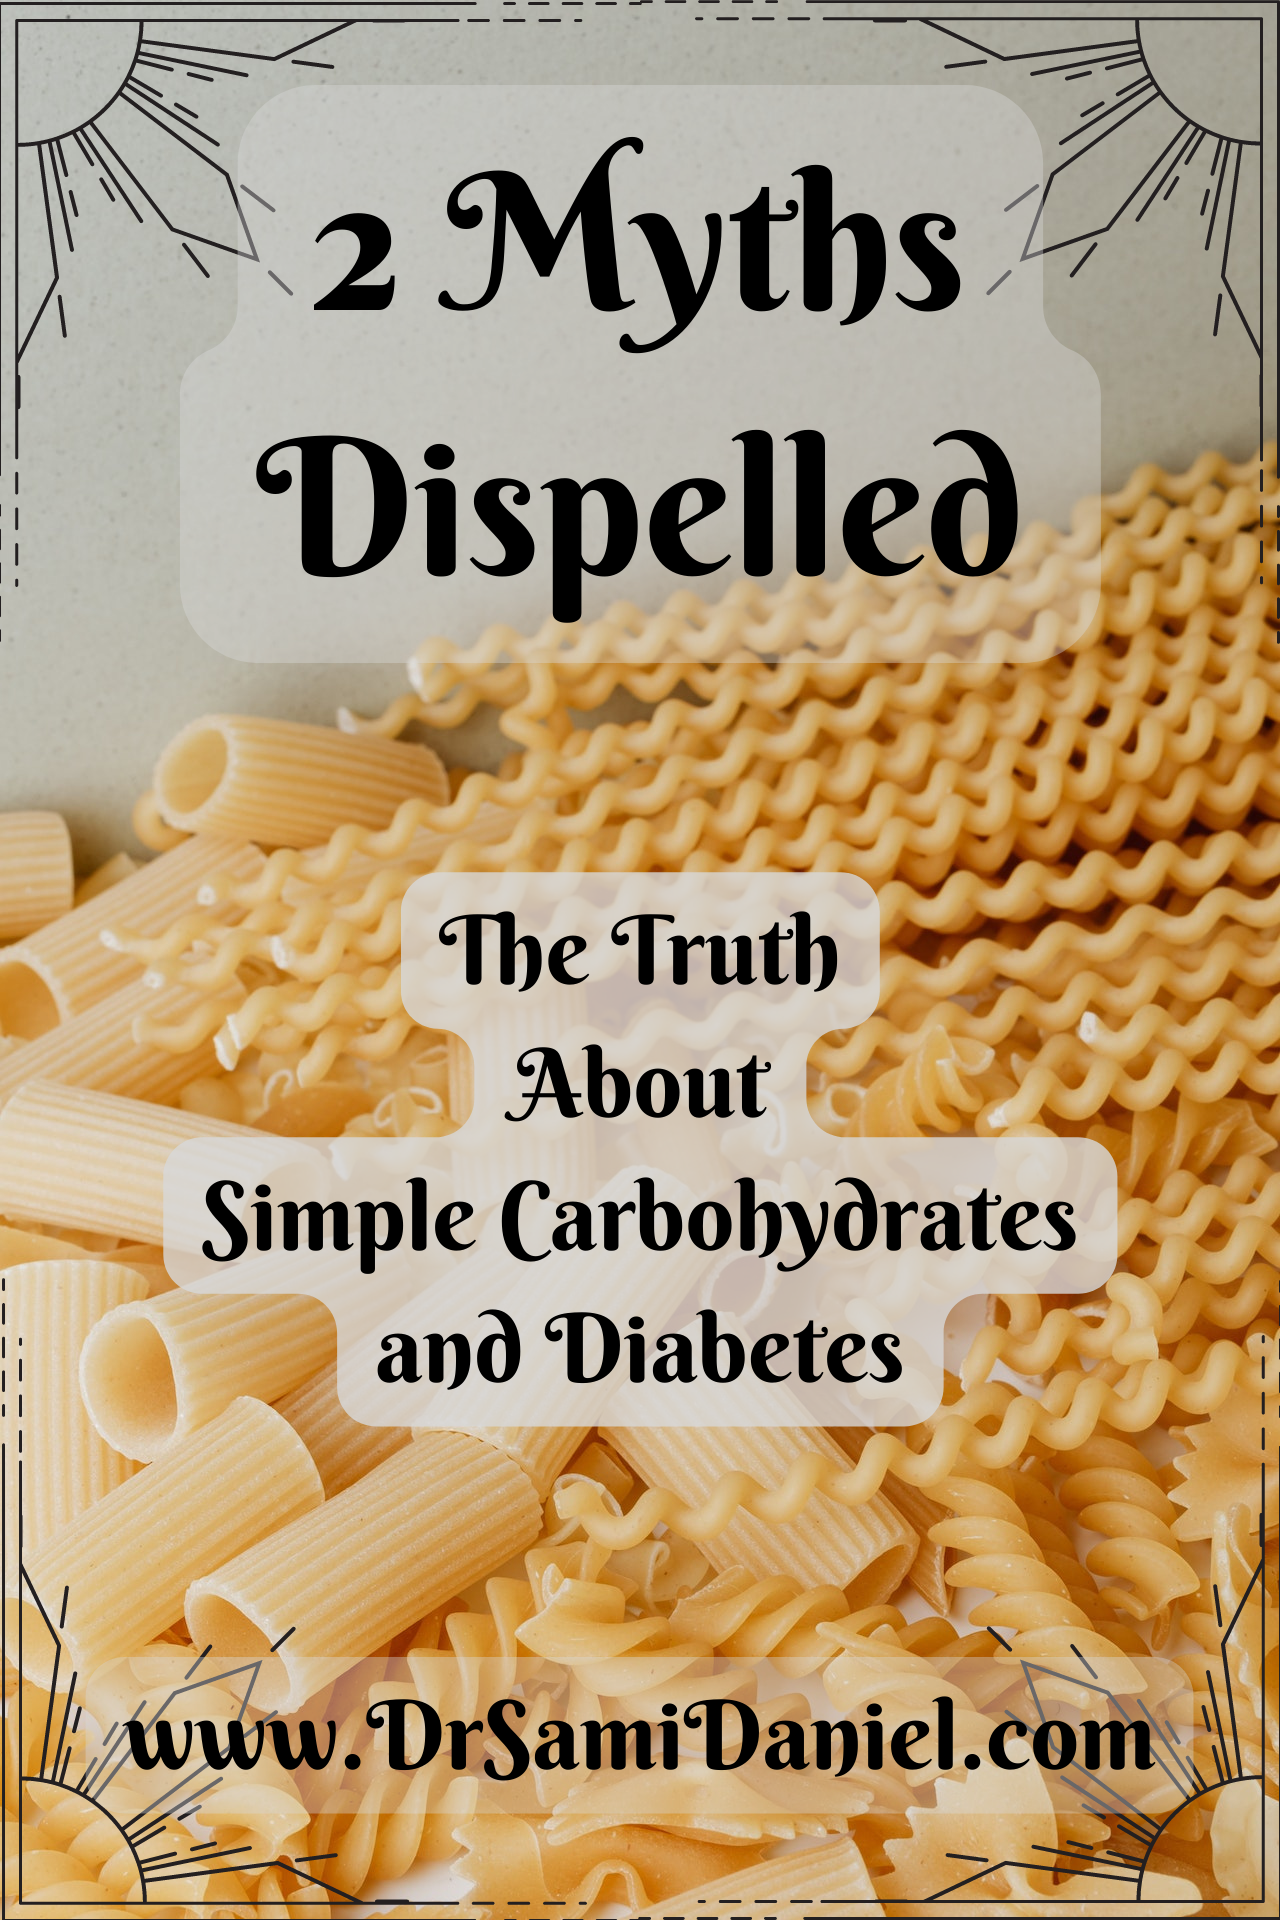 Why are simple carbohydrates being demonized? Let's put that myth to rest and discover the truth about simple carbohydrates and diabetes.